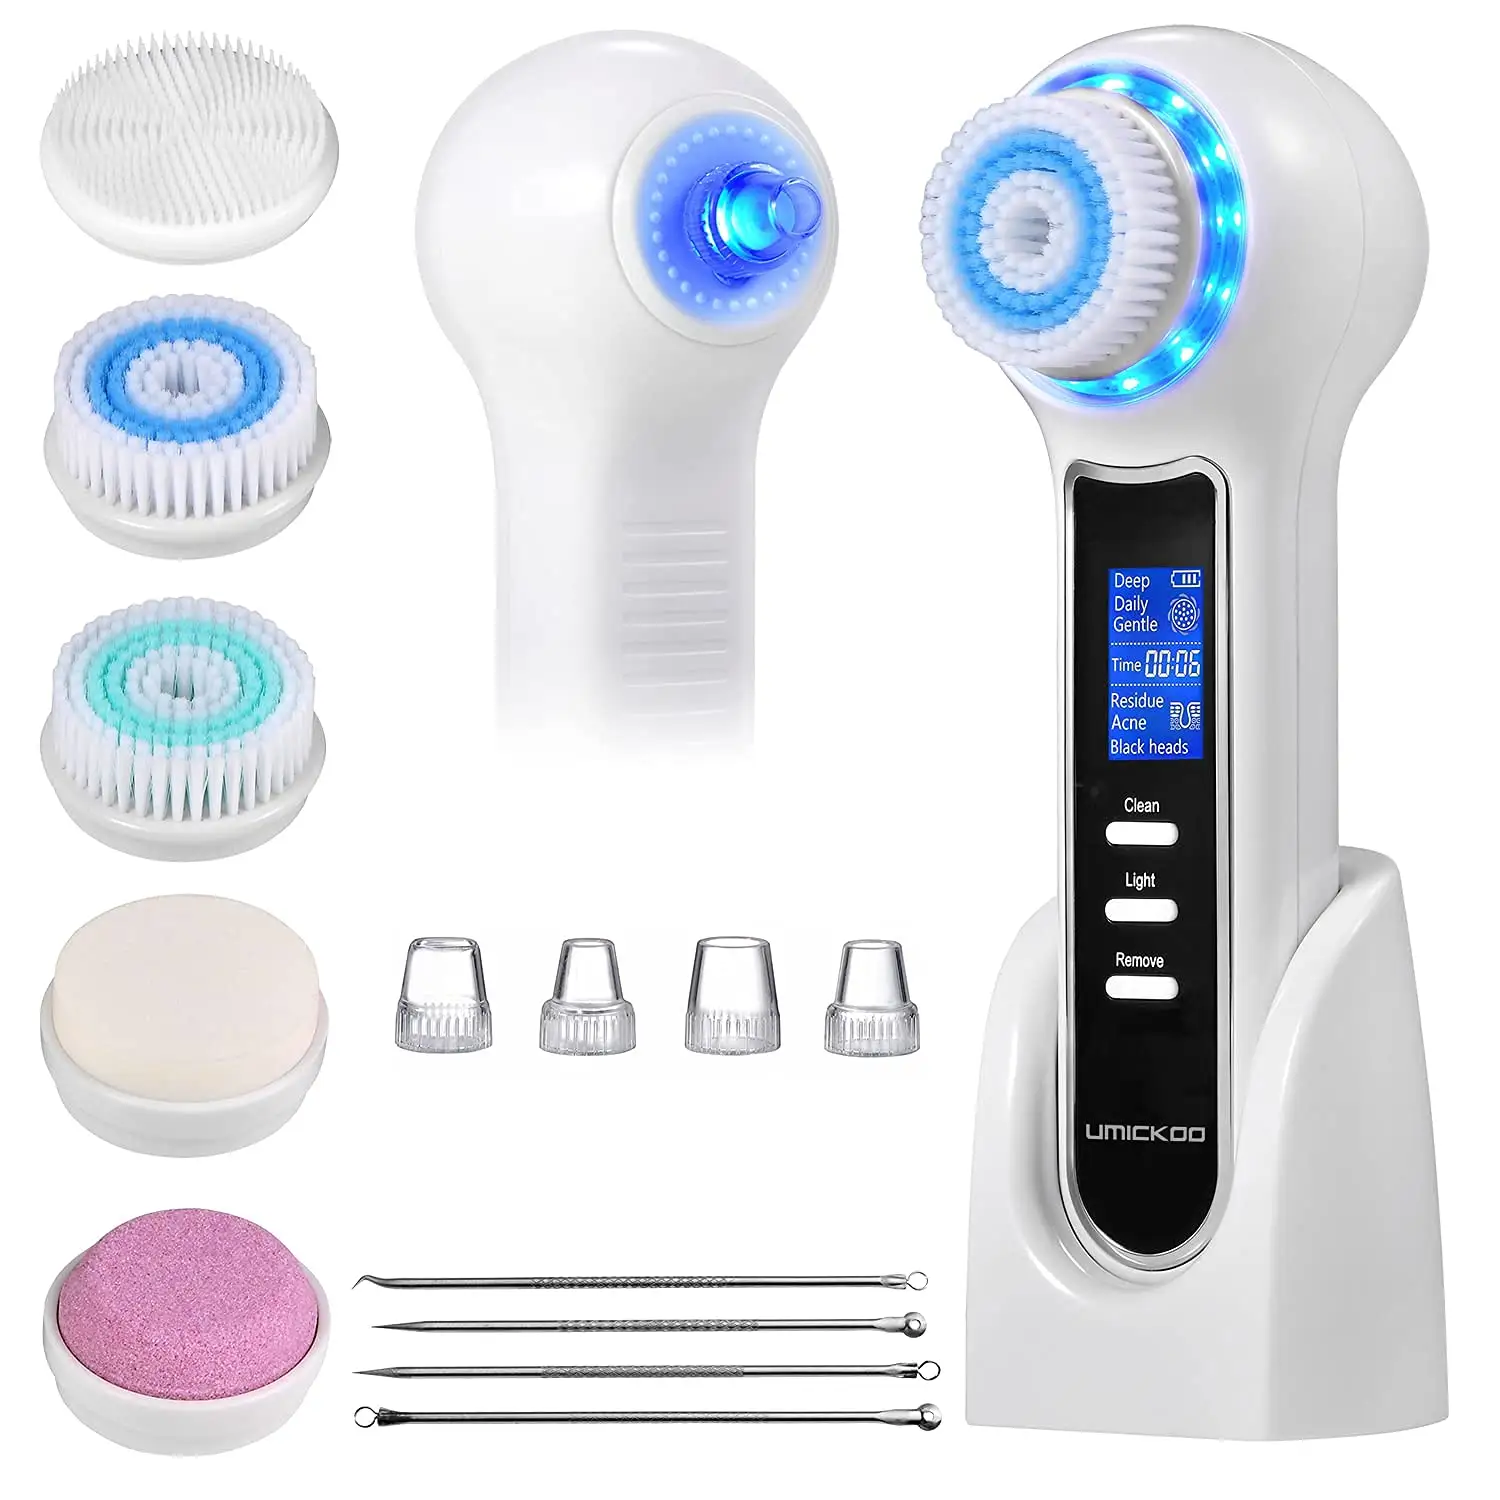 Rechargeable Electric Facial Cleansing Brush Private Label Cleaning Face Spin Handheld Cleanser Brush